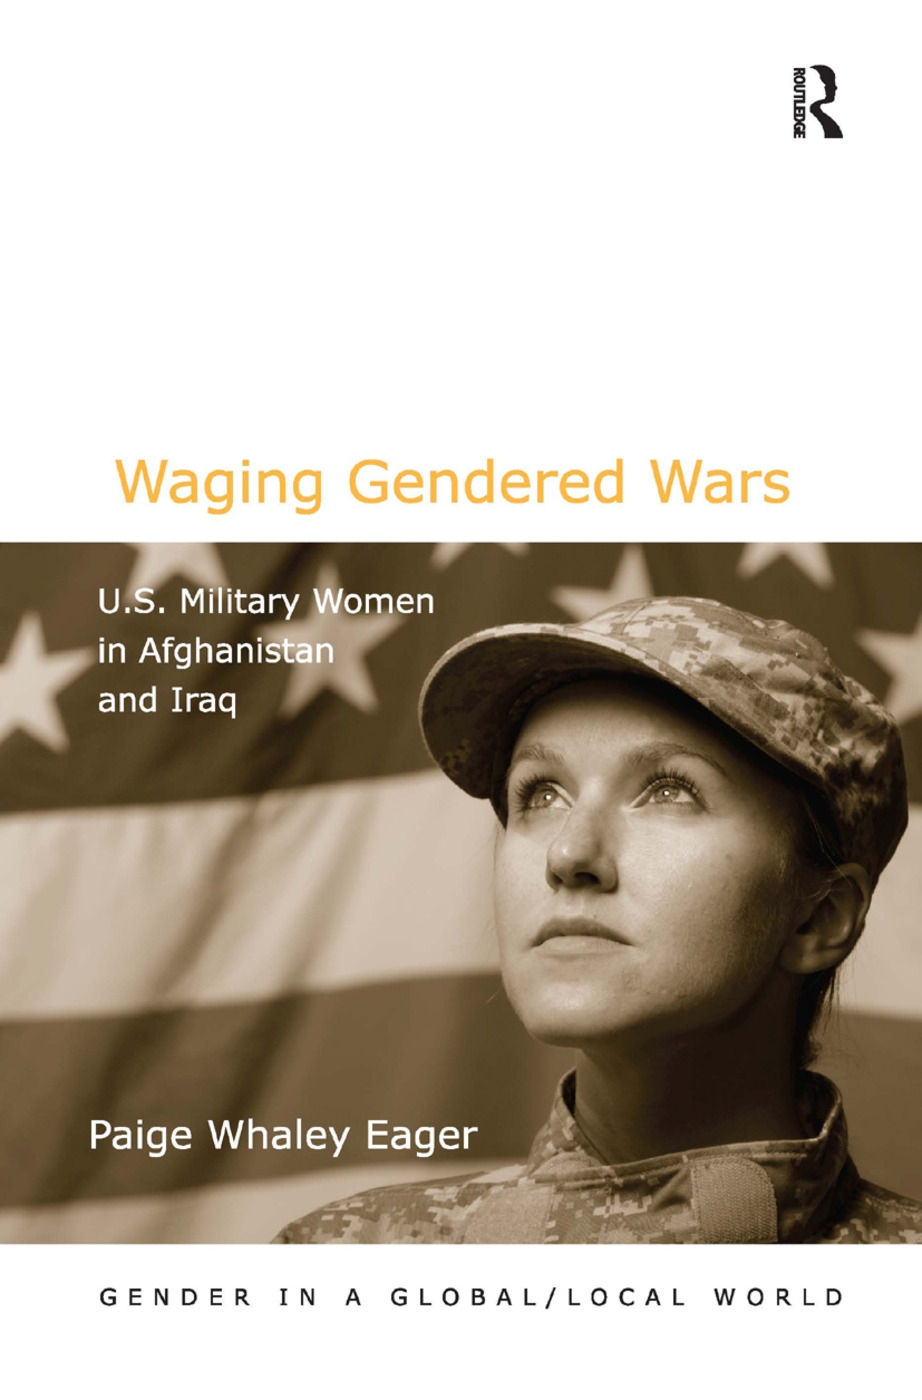 Waging Gendered Wars: U.S. Military Women in Afghanistan and Iraq. Paige Whaley Eager